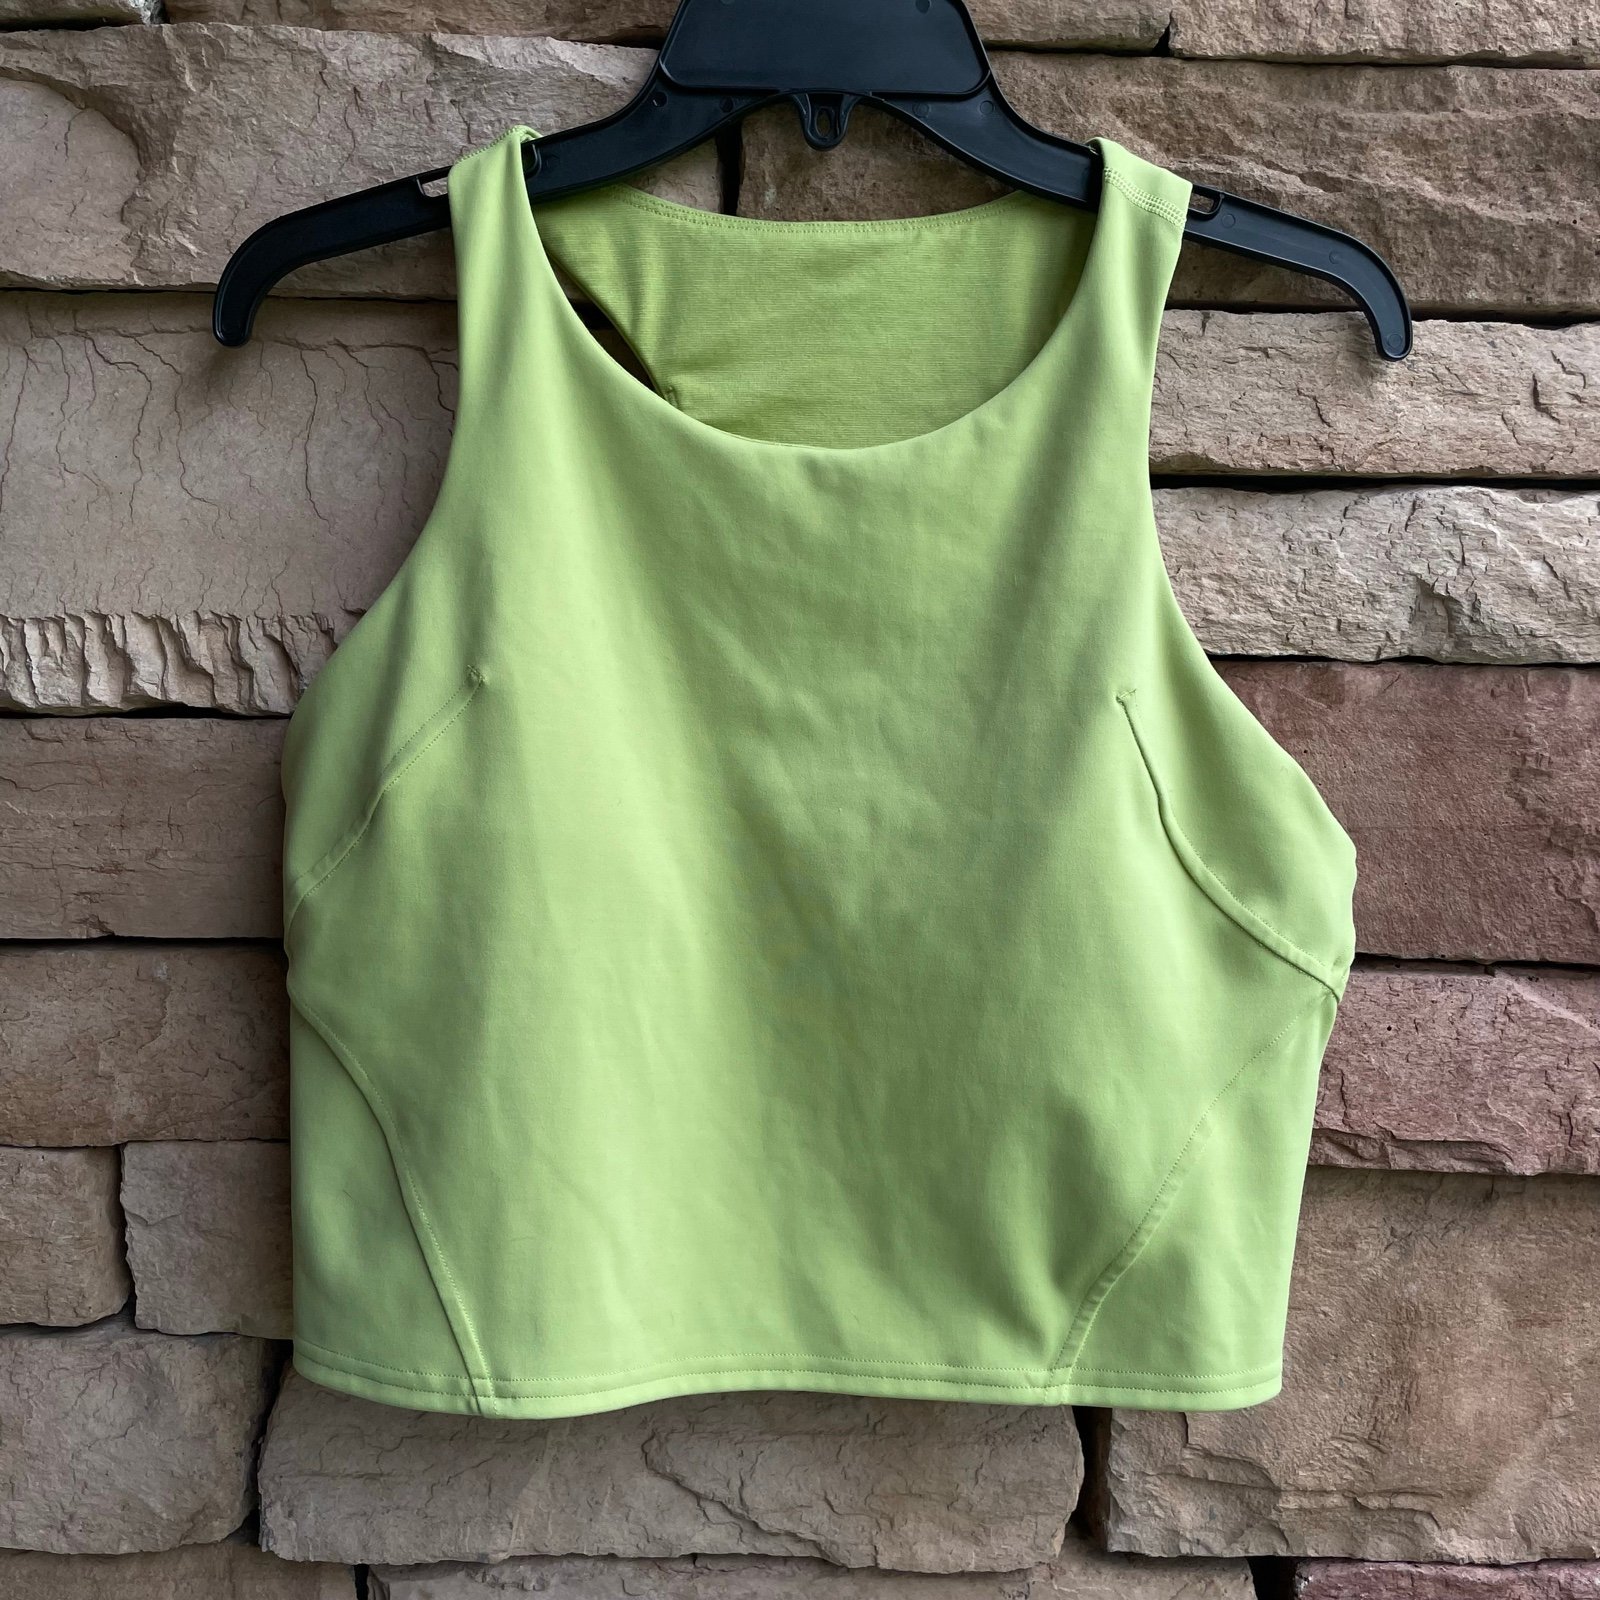 Wholesale price Lululemon yellow lime cropped Align tan